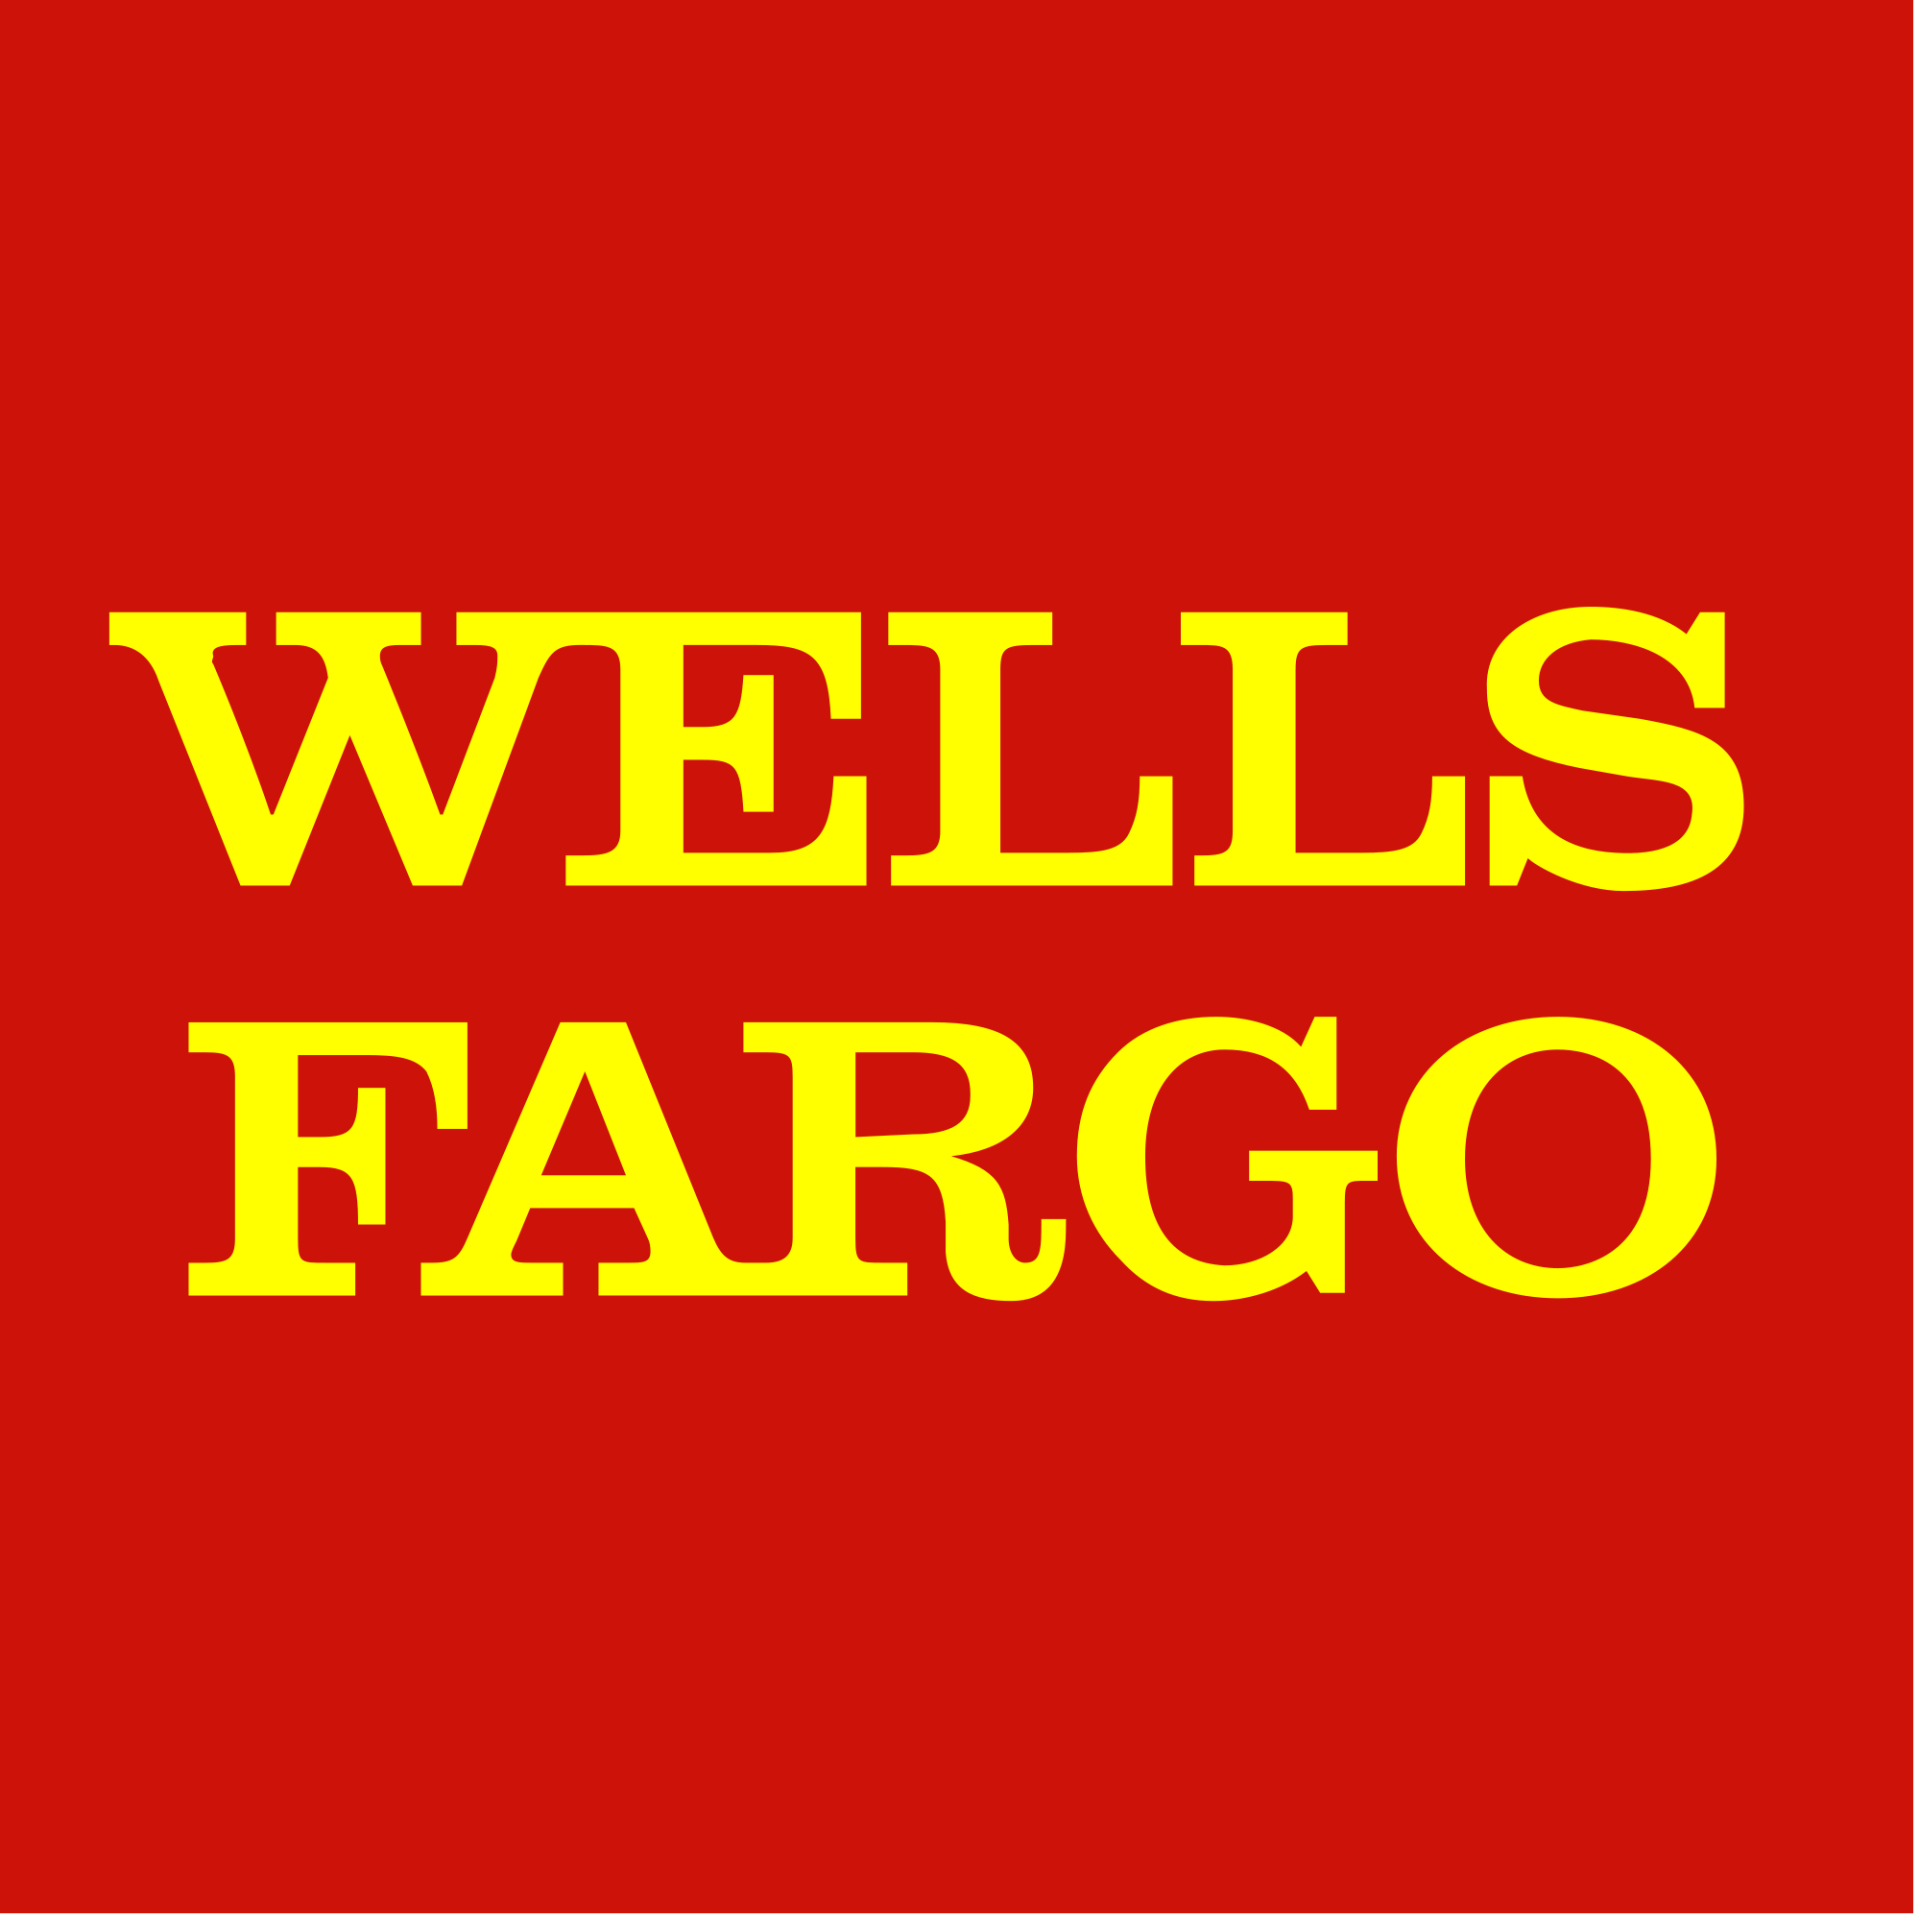 WFC Is Wells Fargo Stock a Buy, Sell or Hold After Its Earnings Miss?